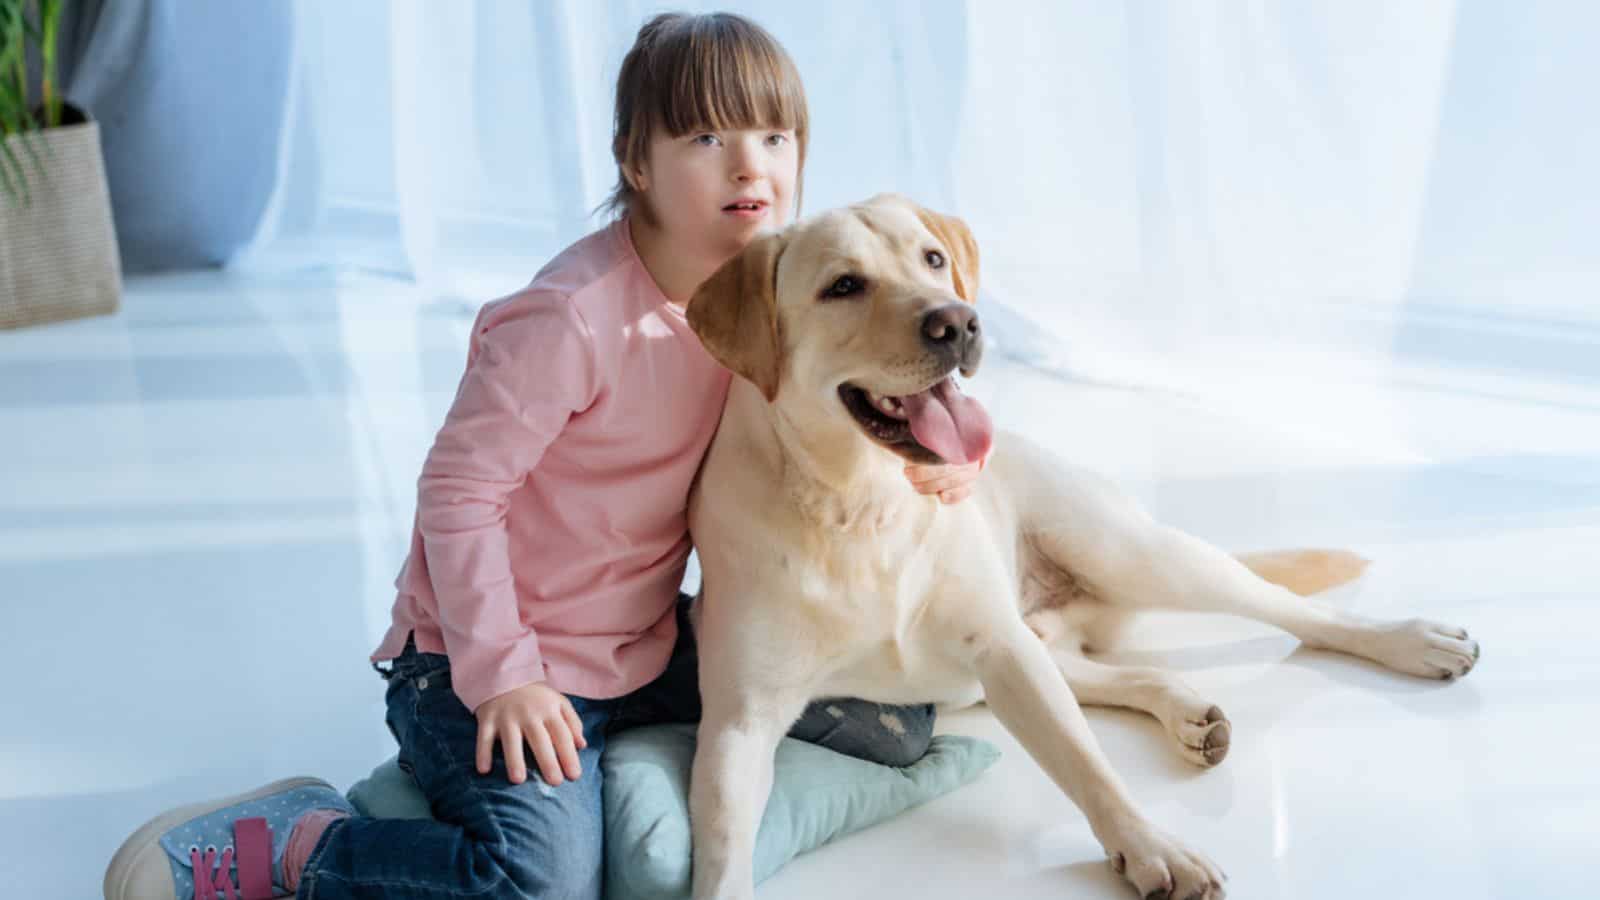 Child with down syndrome near Labrador dog on the floor